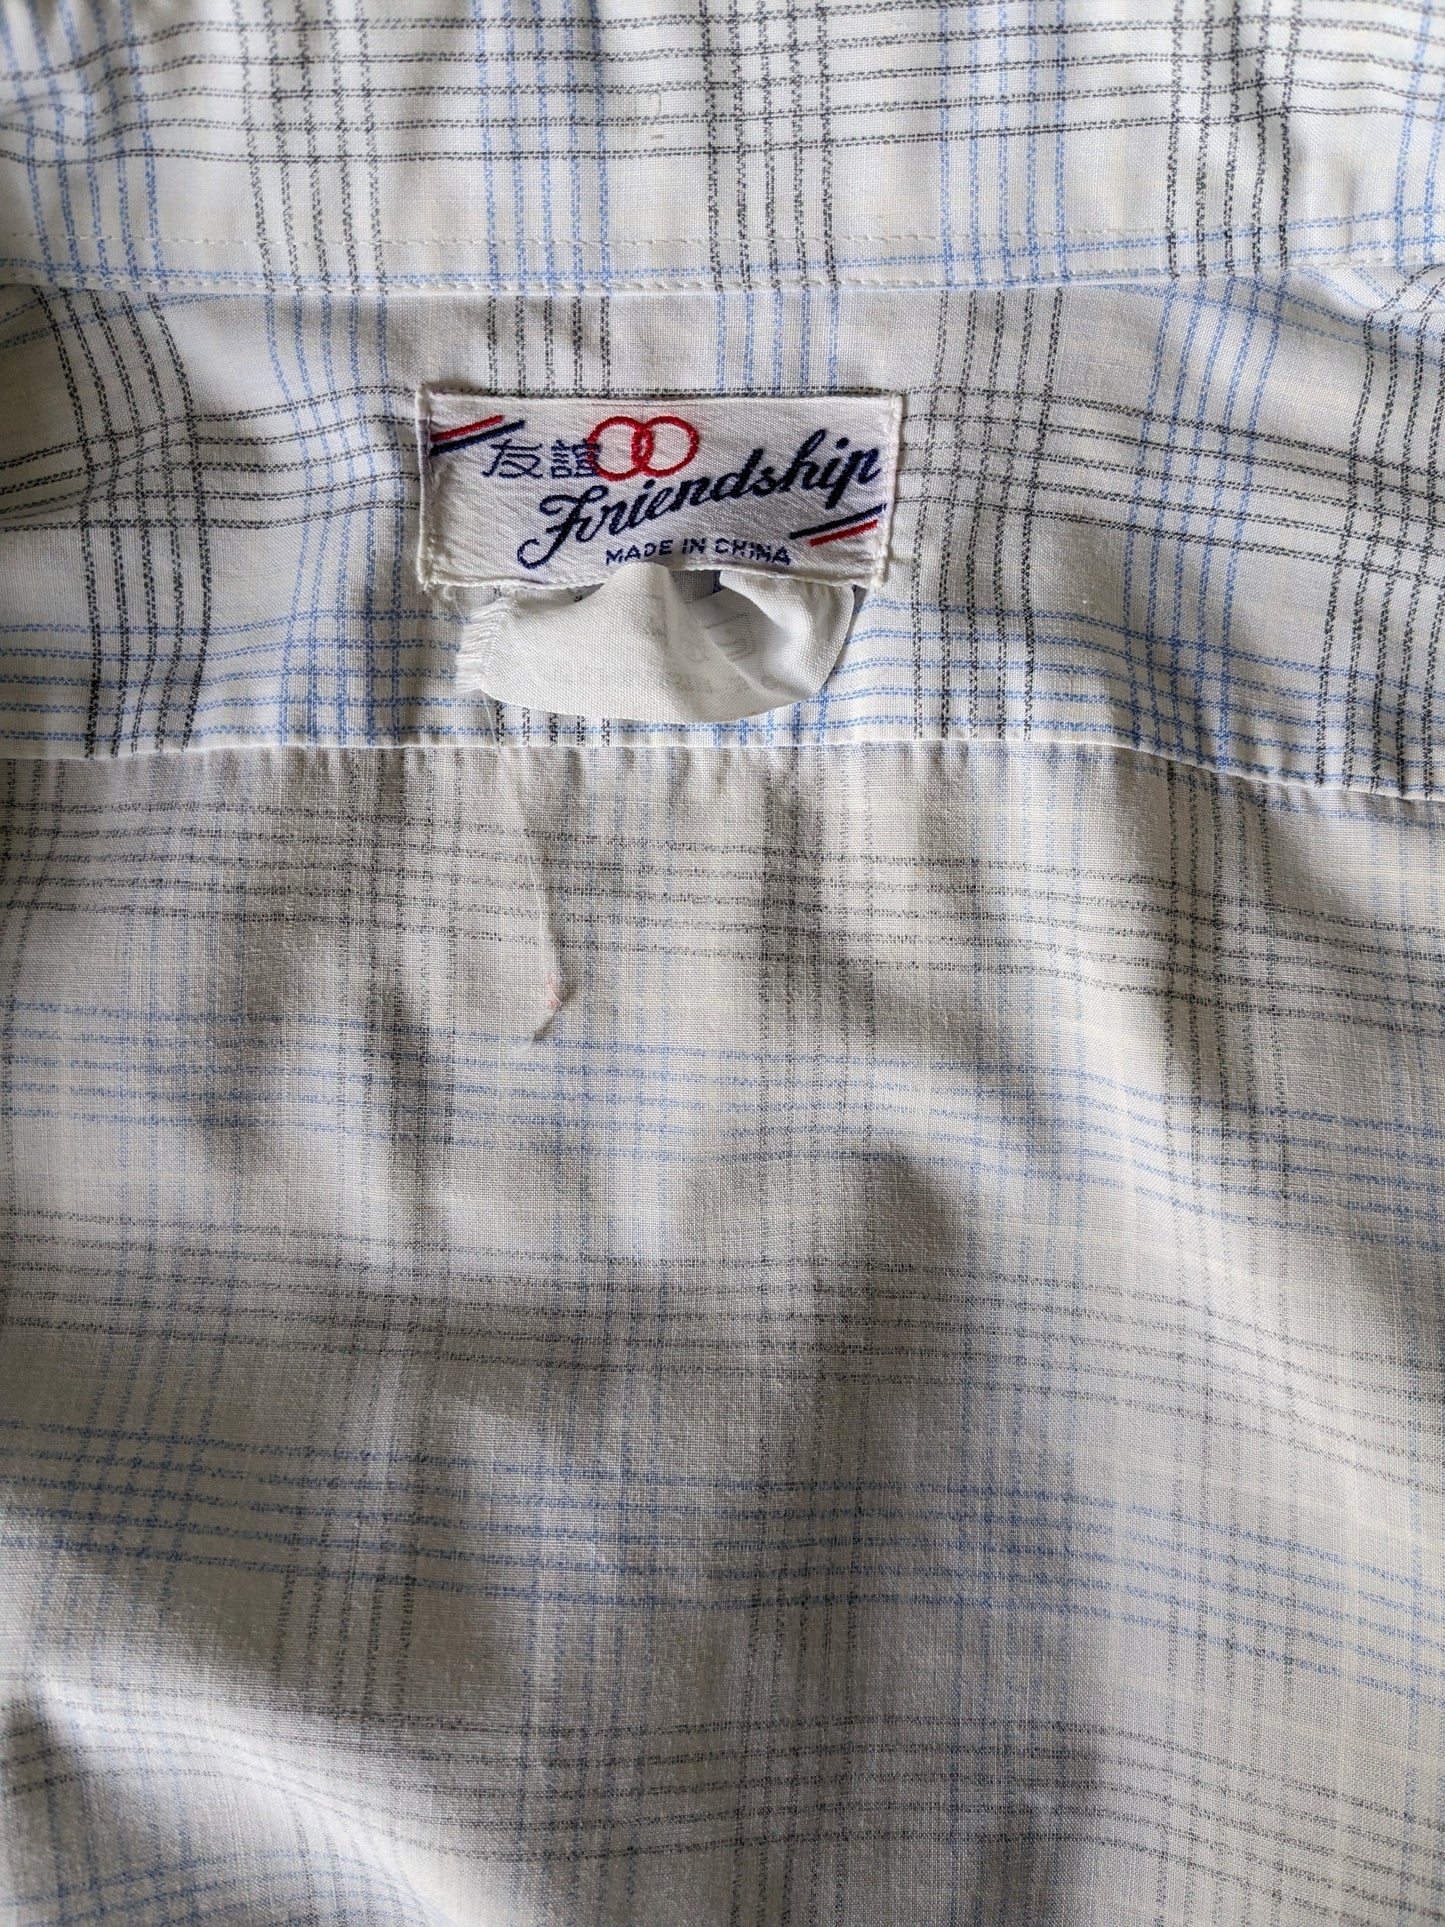 Vintage Friendship 70's shirt with point collar. Blue white black checked. Size XL.